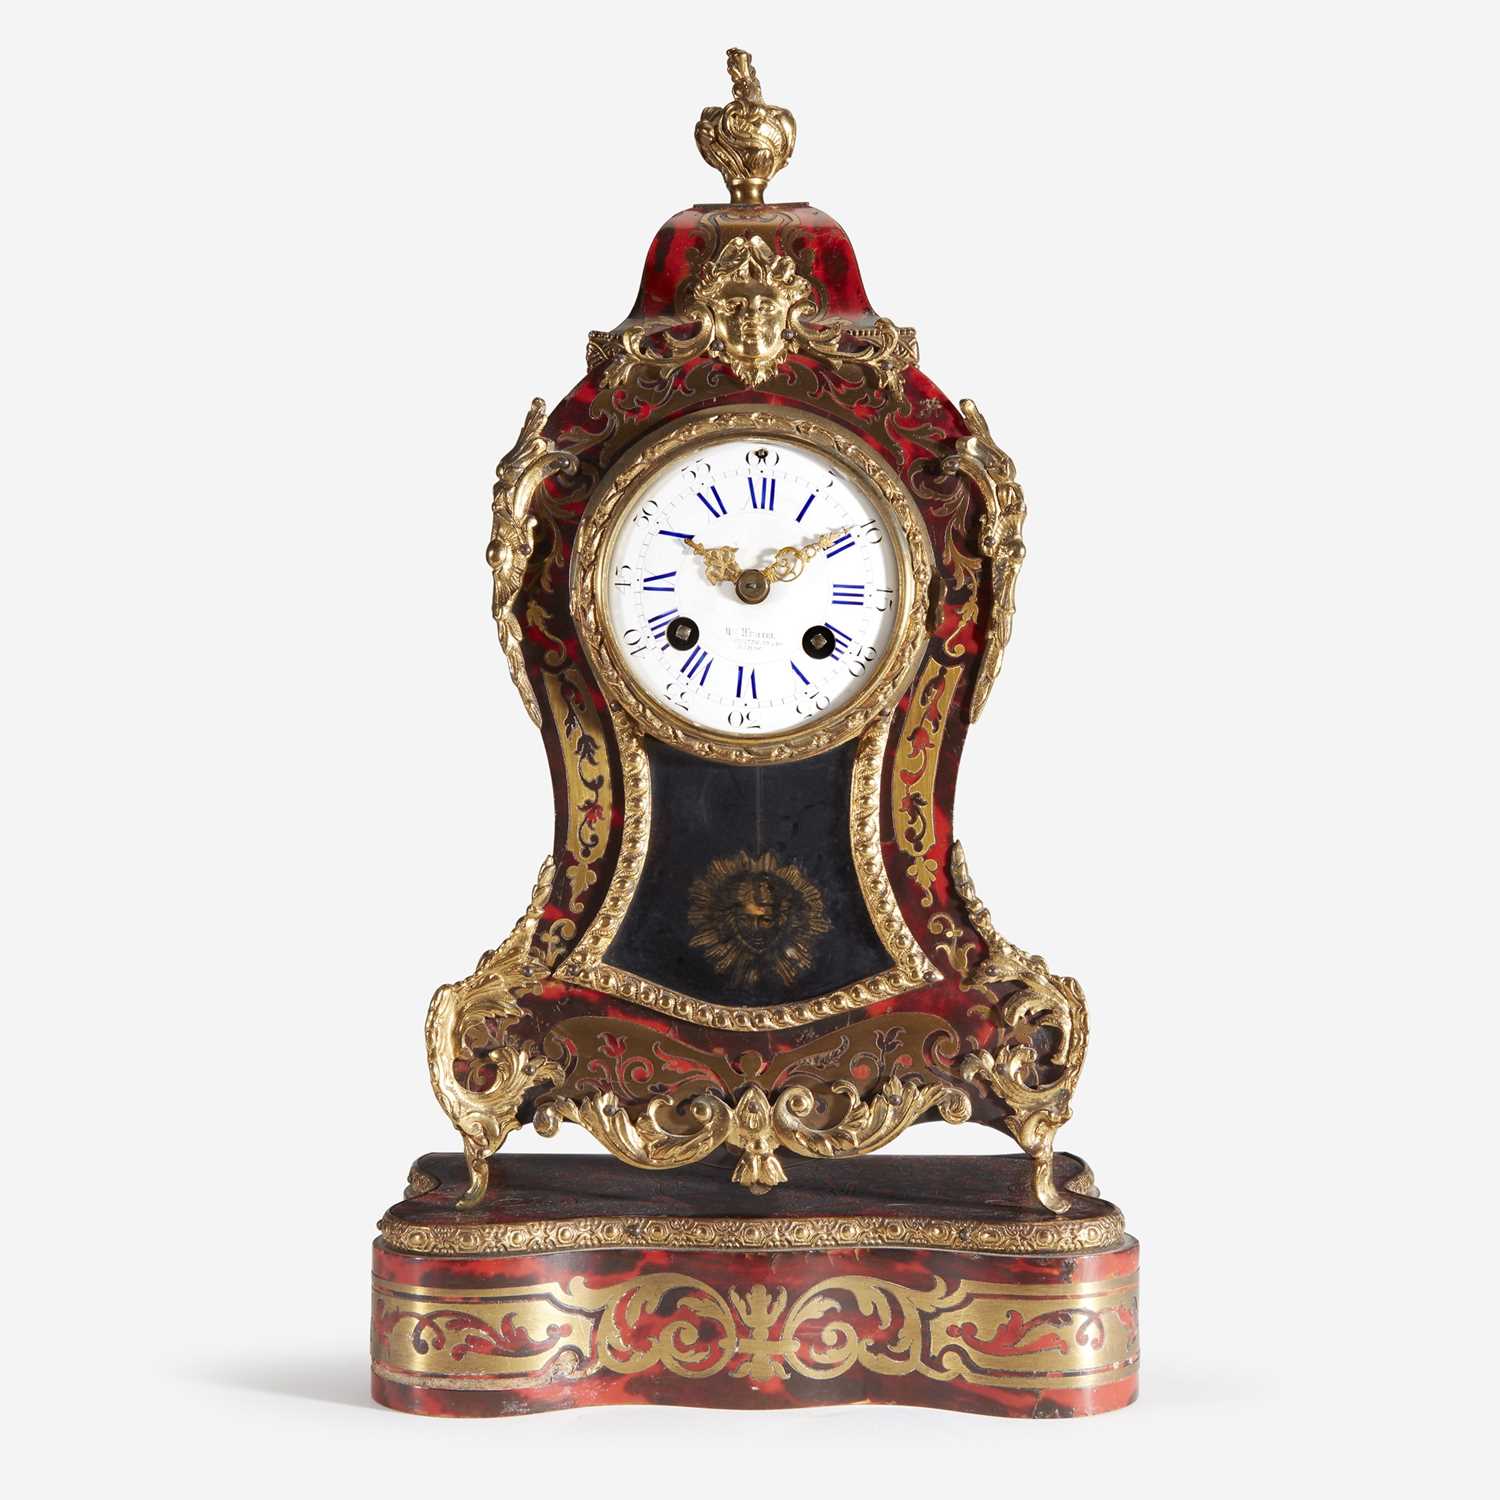 Lot 21 - A Louis XVI Style Ormolu-Mounted Brass-Inlaid Red Tortoiseshell Boulle Marquetry Bracket Clock on Stand*